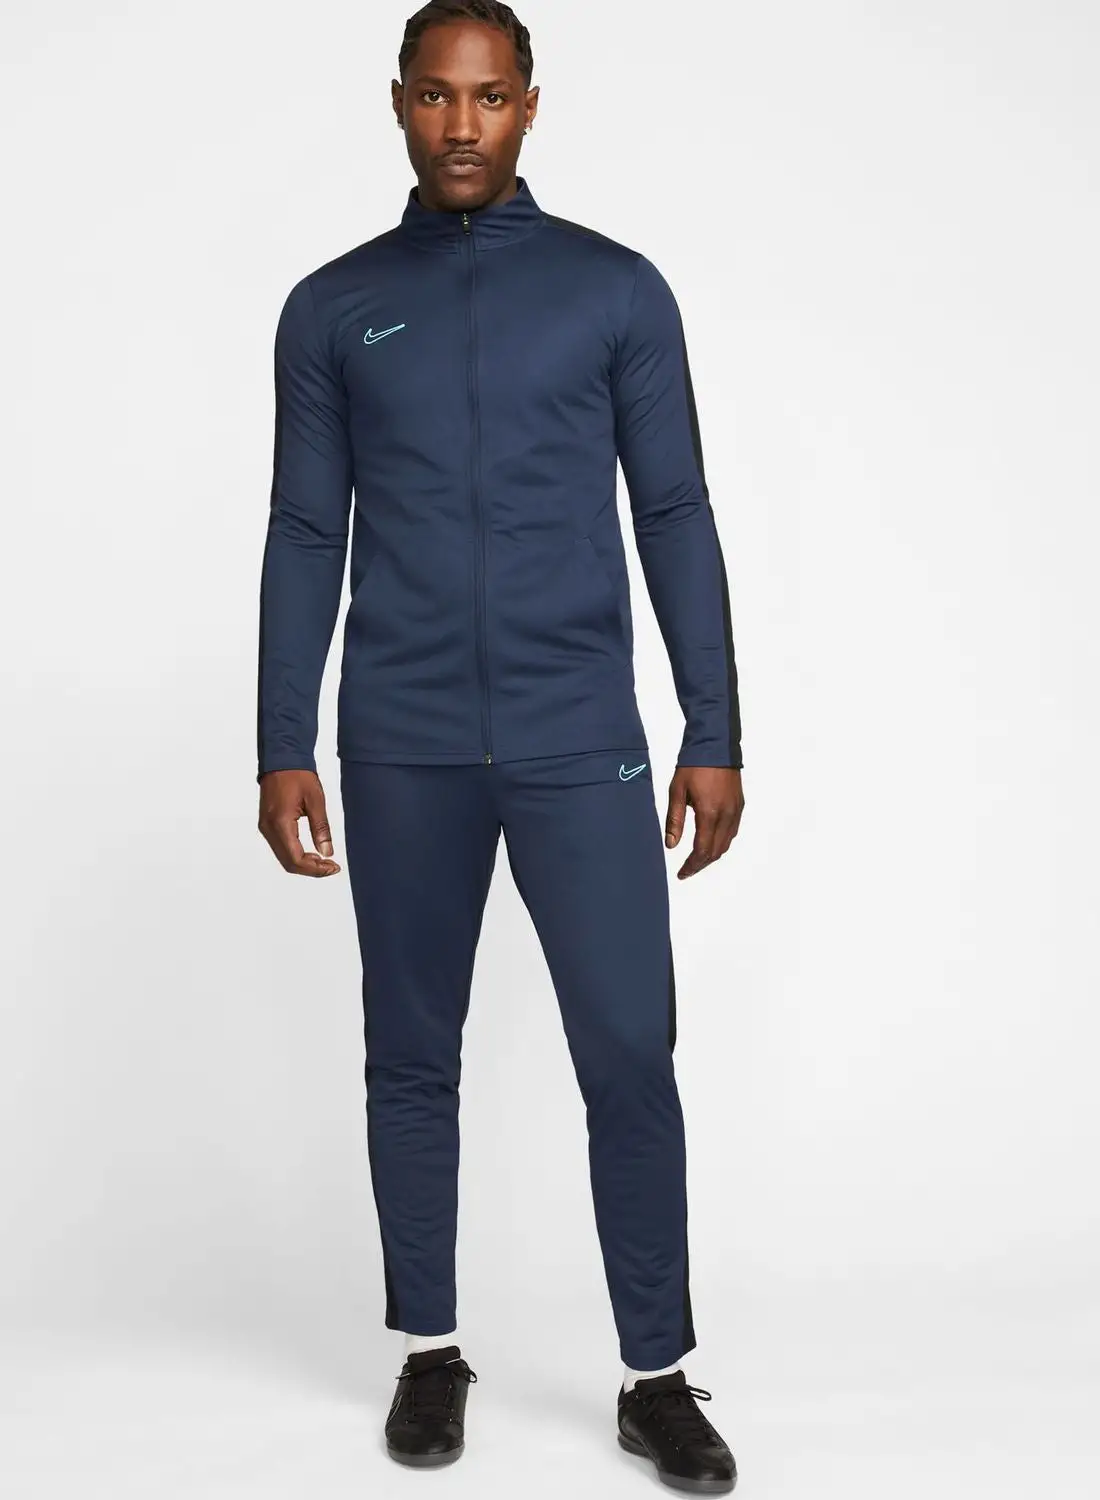 Nike Dri-Fit Acd23 Track Suit